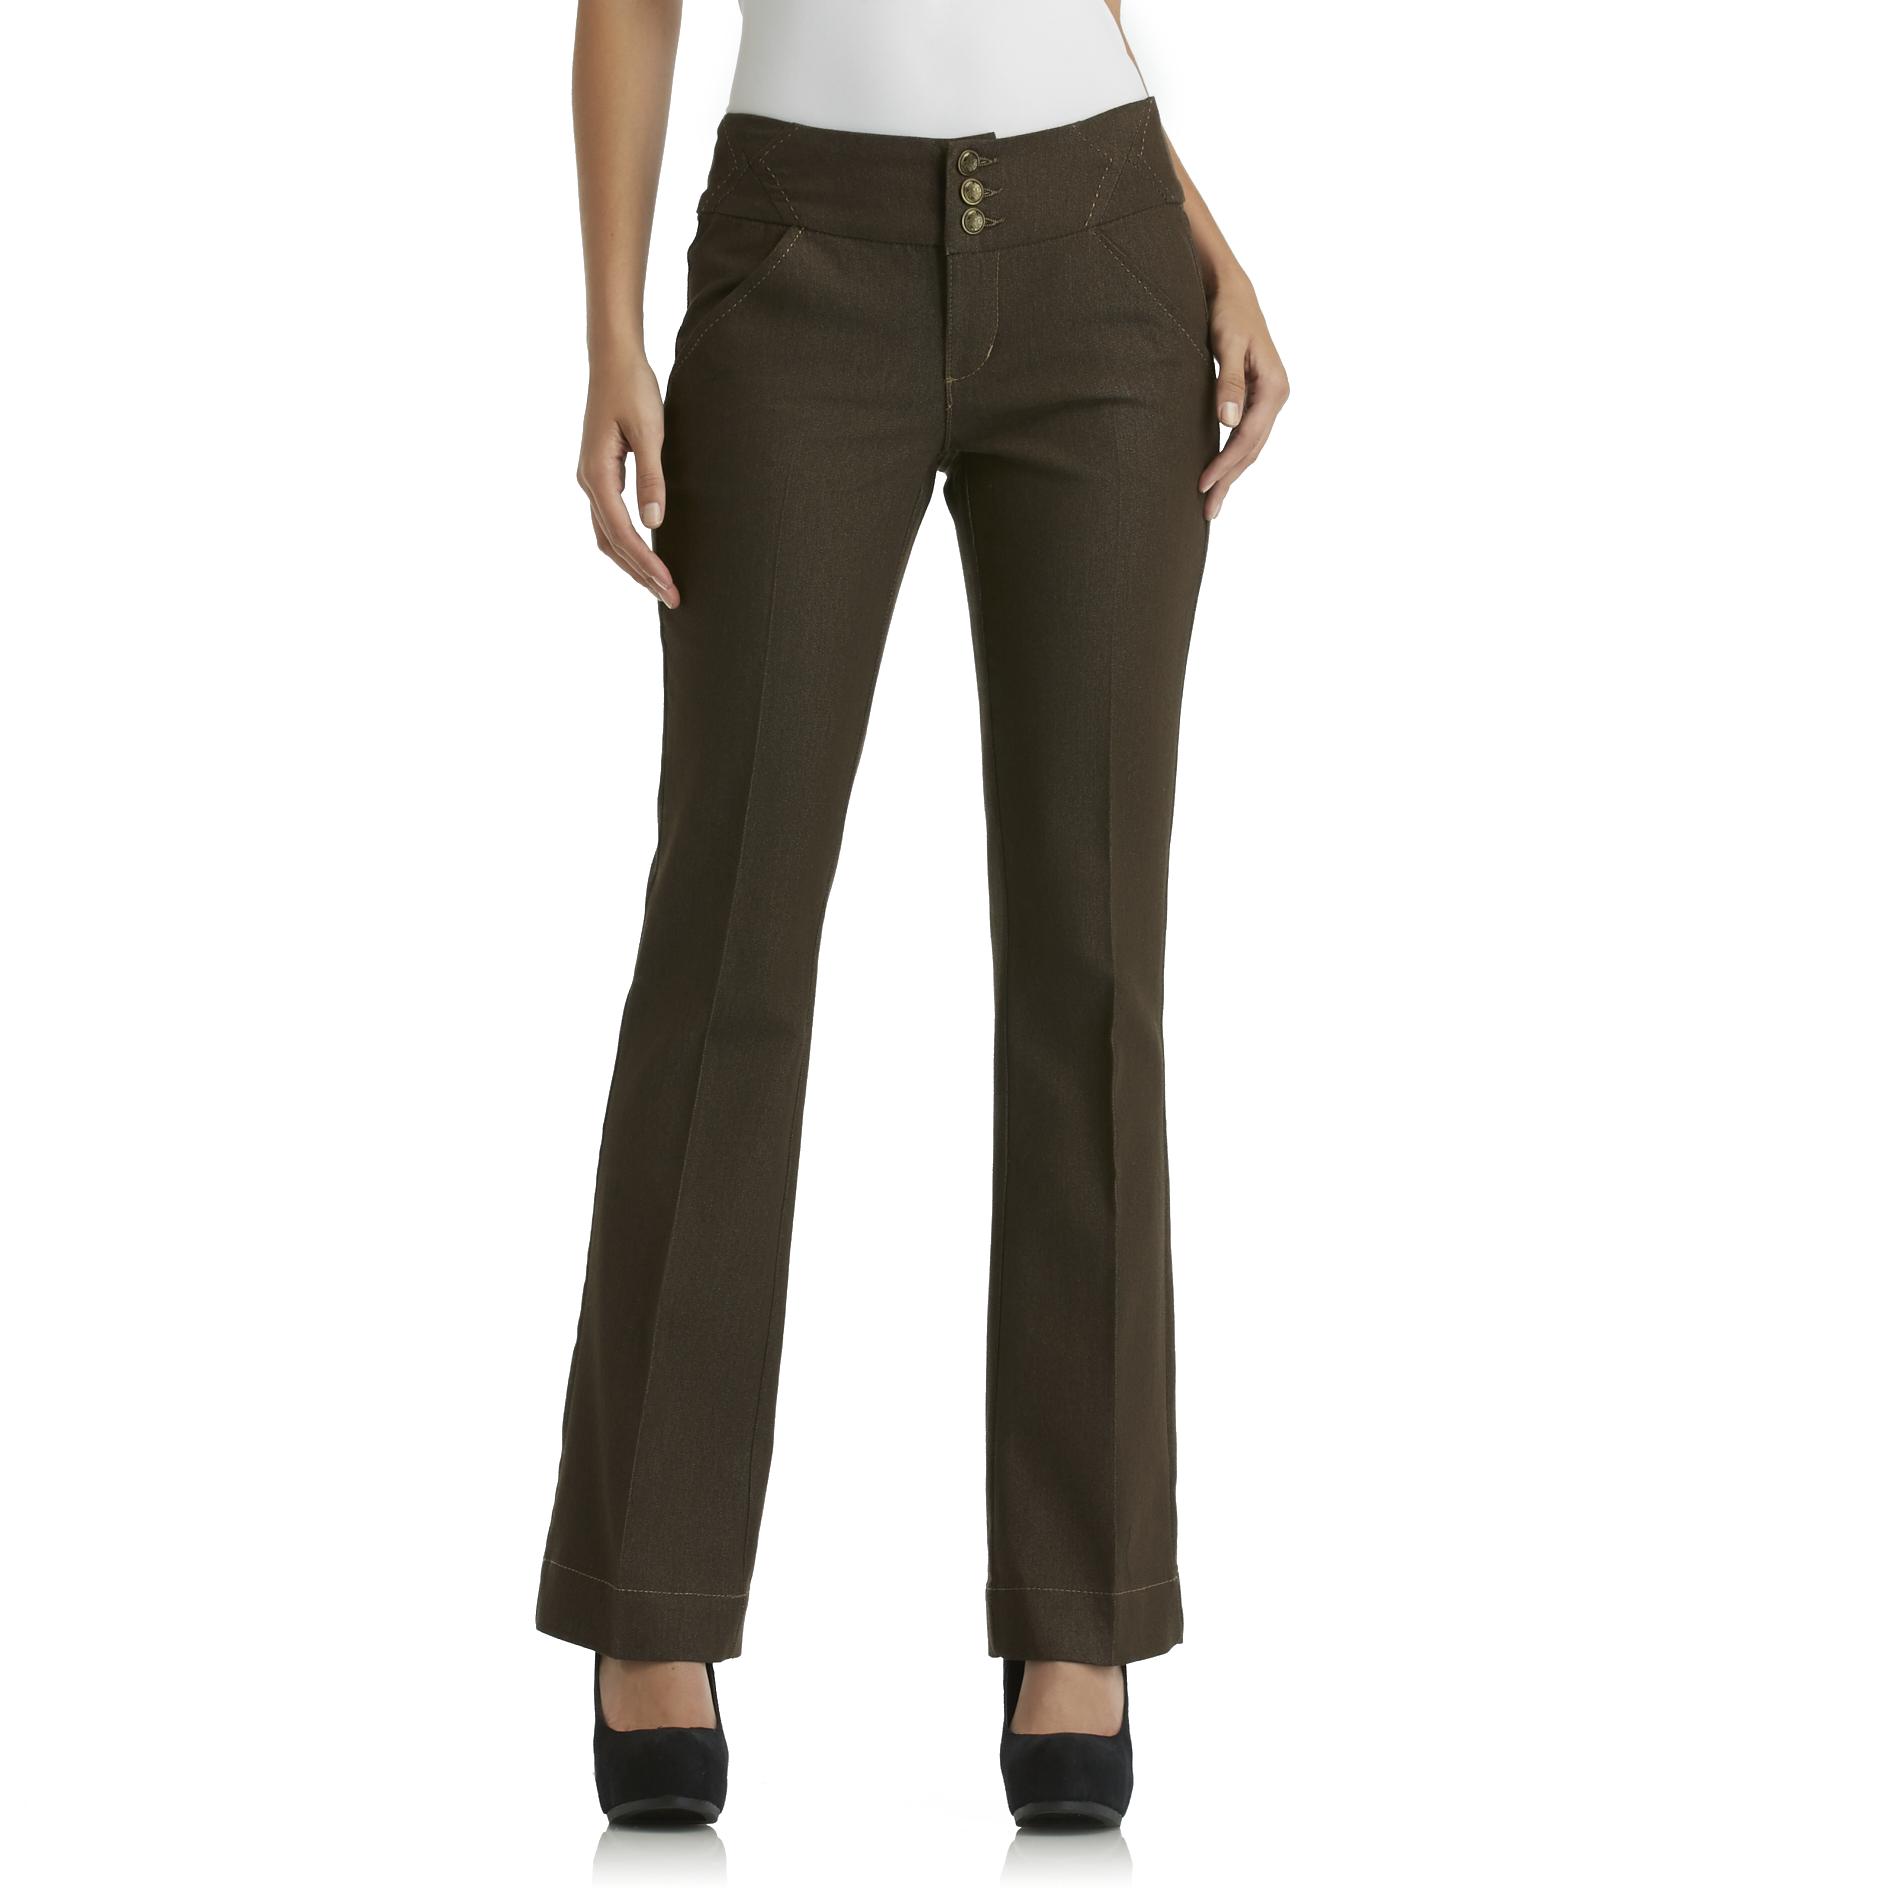 Canyon River Blues Women's Colored Trouser Jeans